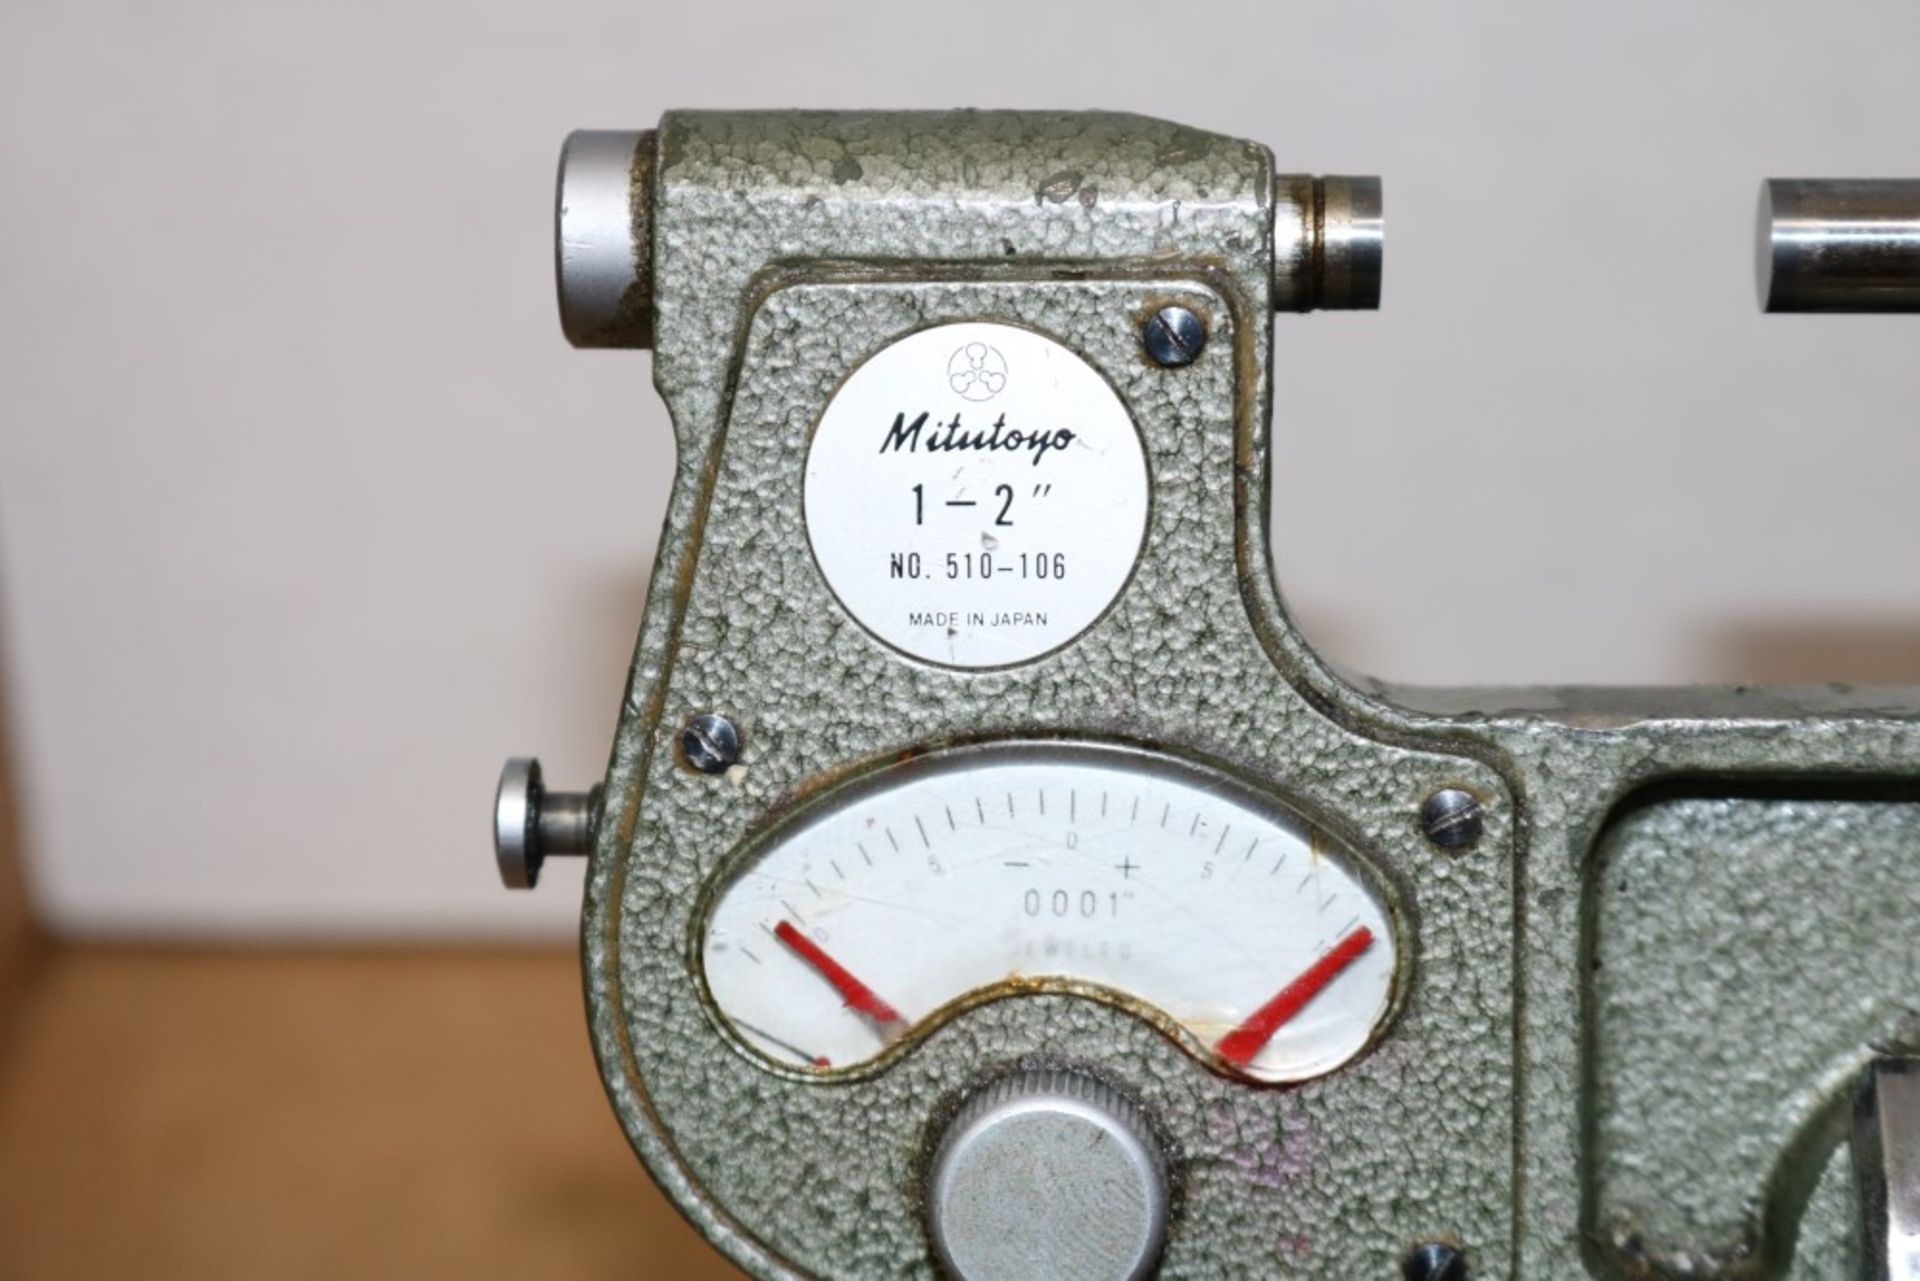 Mitutoyo OD Indicating Micrometer with Stand 0-1", Mitutoyo OD Indicating Micrometer with Stand - Image 3 of 6